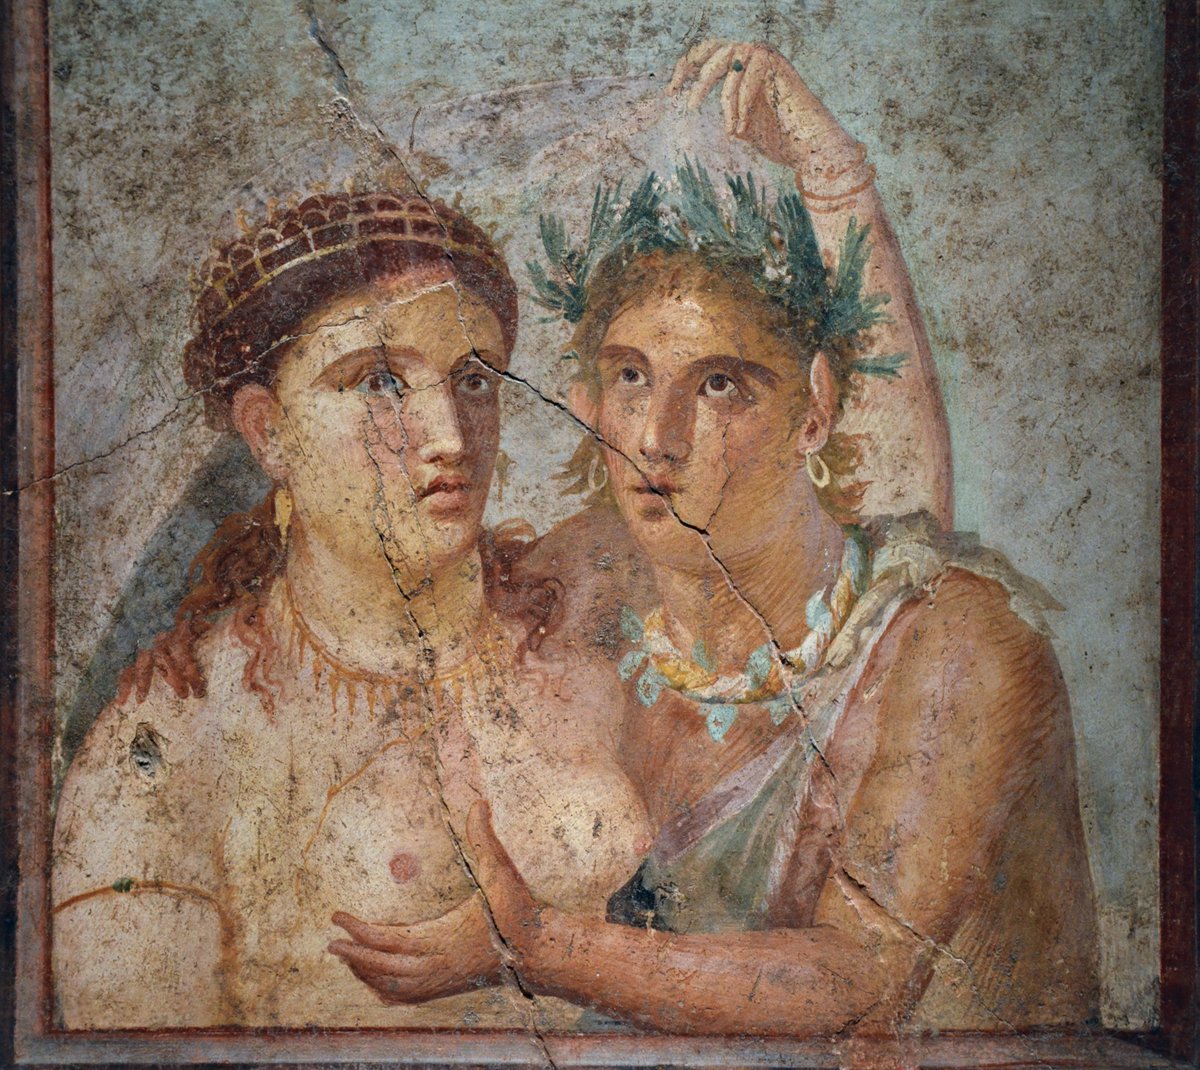 #FrescoFriday - Fragment of wall painting depicting a satyr and a maenad. From the House of Caecilius Jucundus in Pompeii. Naples National Archaeological Museum.